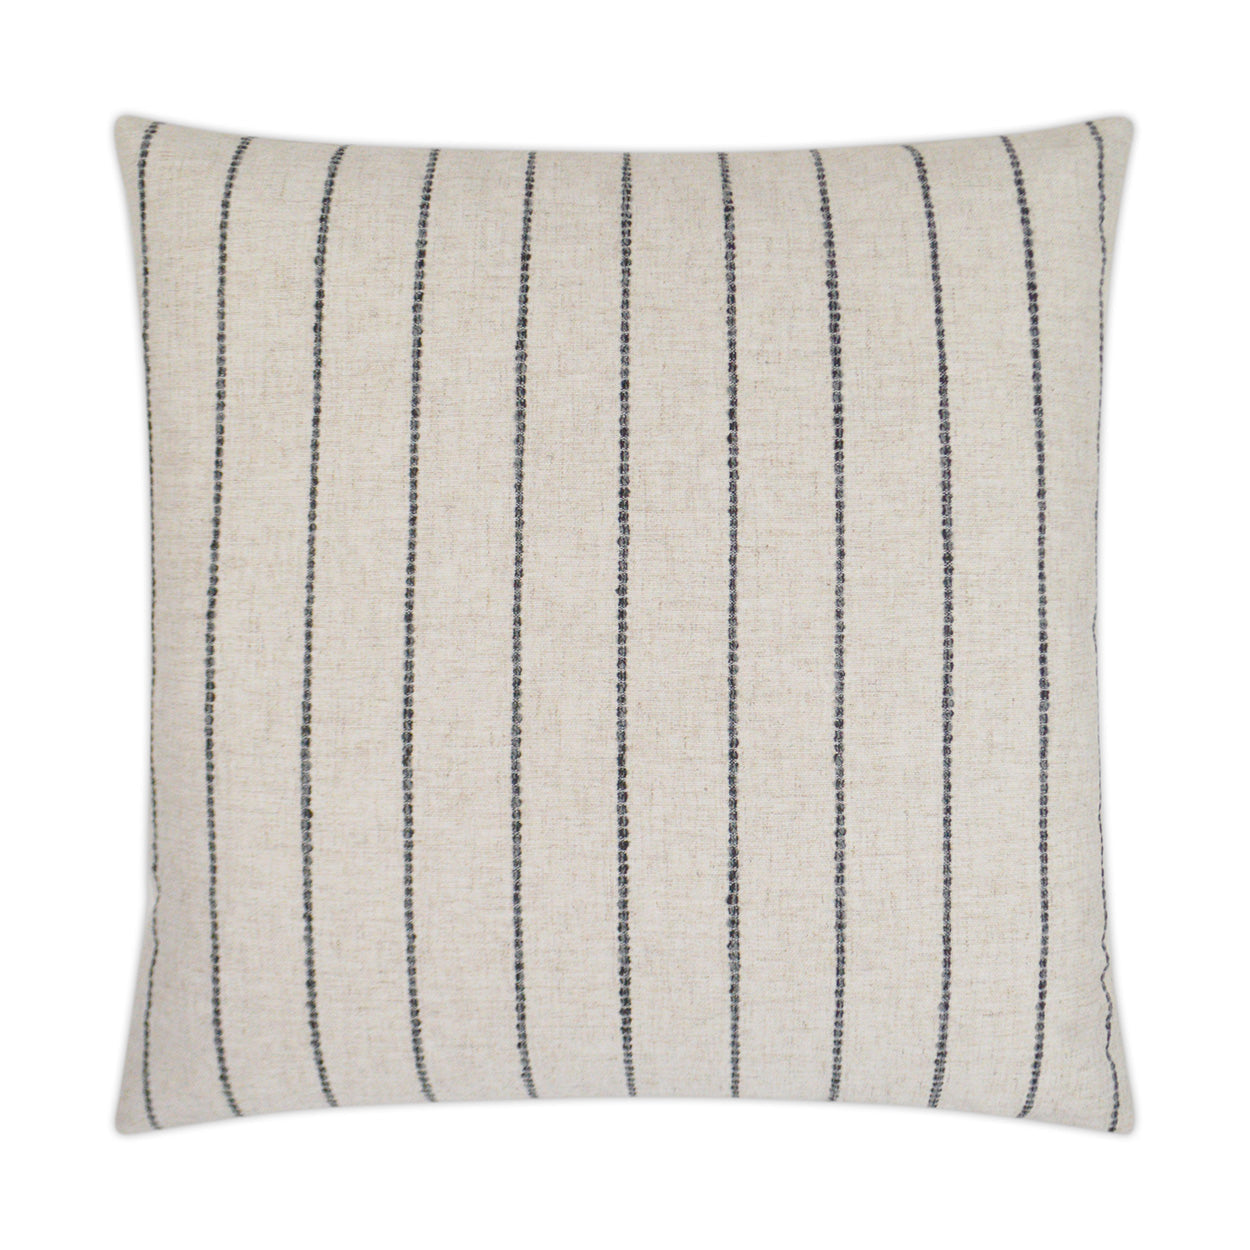 Evie Pillow - Ivory